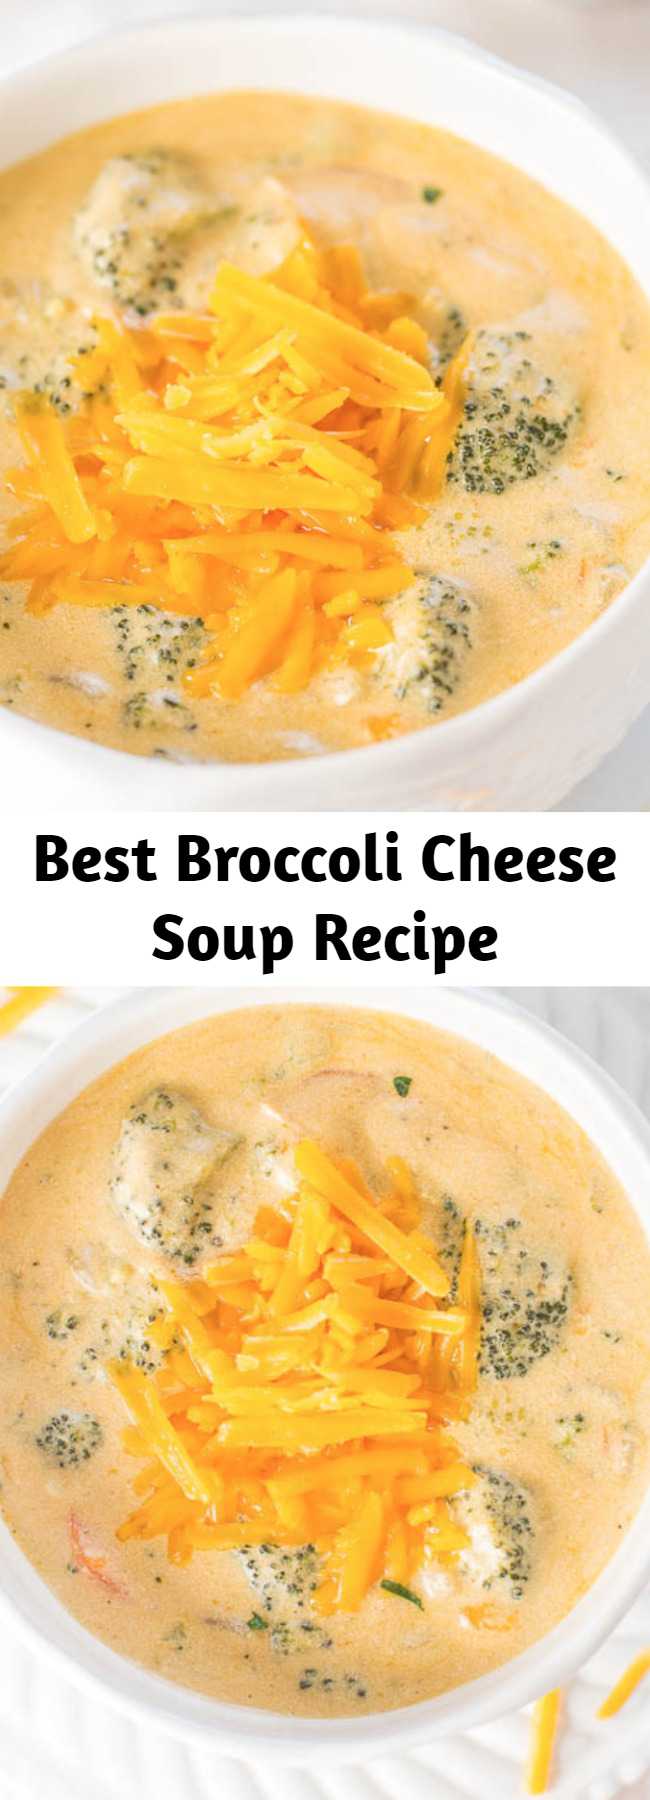 Best Broccoli Cheese Soup Recipe - This is the best broccoli cheese soup. Not only that, it’s some of the best soup I’ve ever tasted, period. If you like Panera’s broccoli cheddar soup, this blows the pants off it. It’s an easy soup to make and is ready in 1 hour. You’ll be rewarded with the best, creamiest, richest, and most amazing soup.